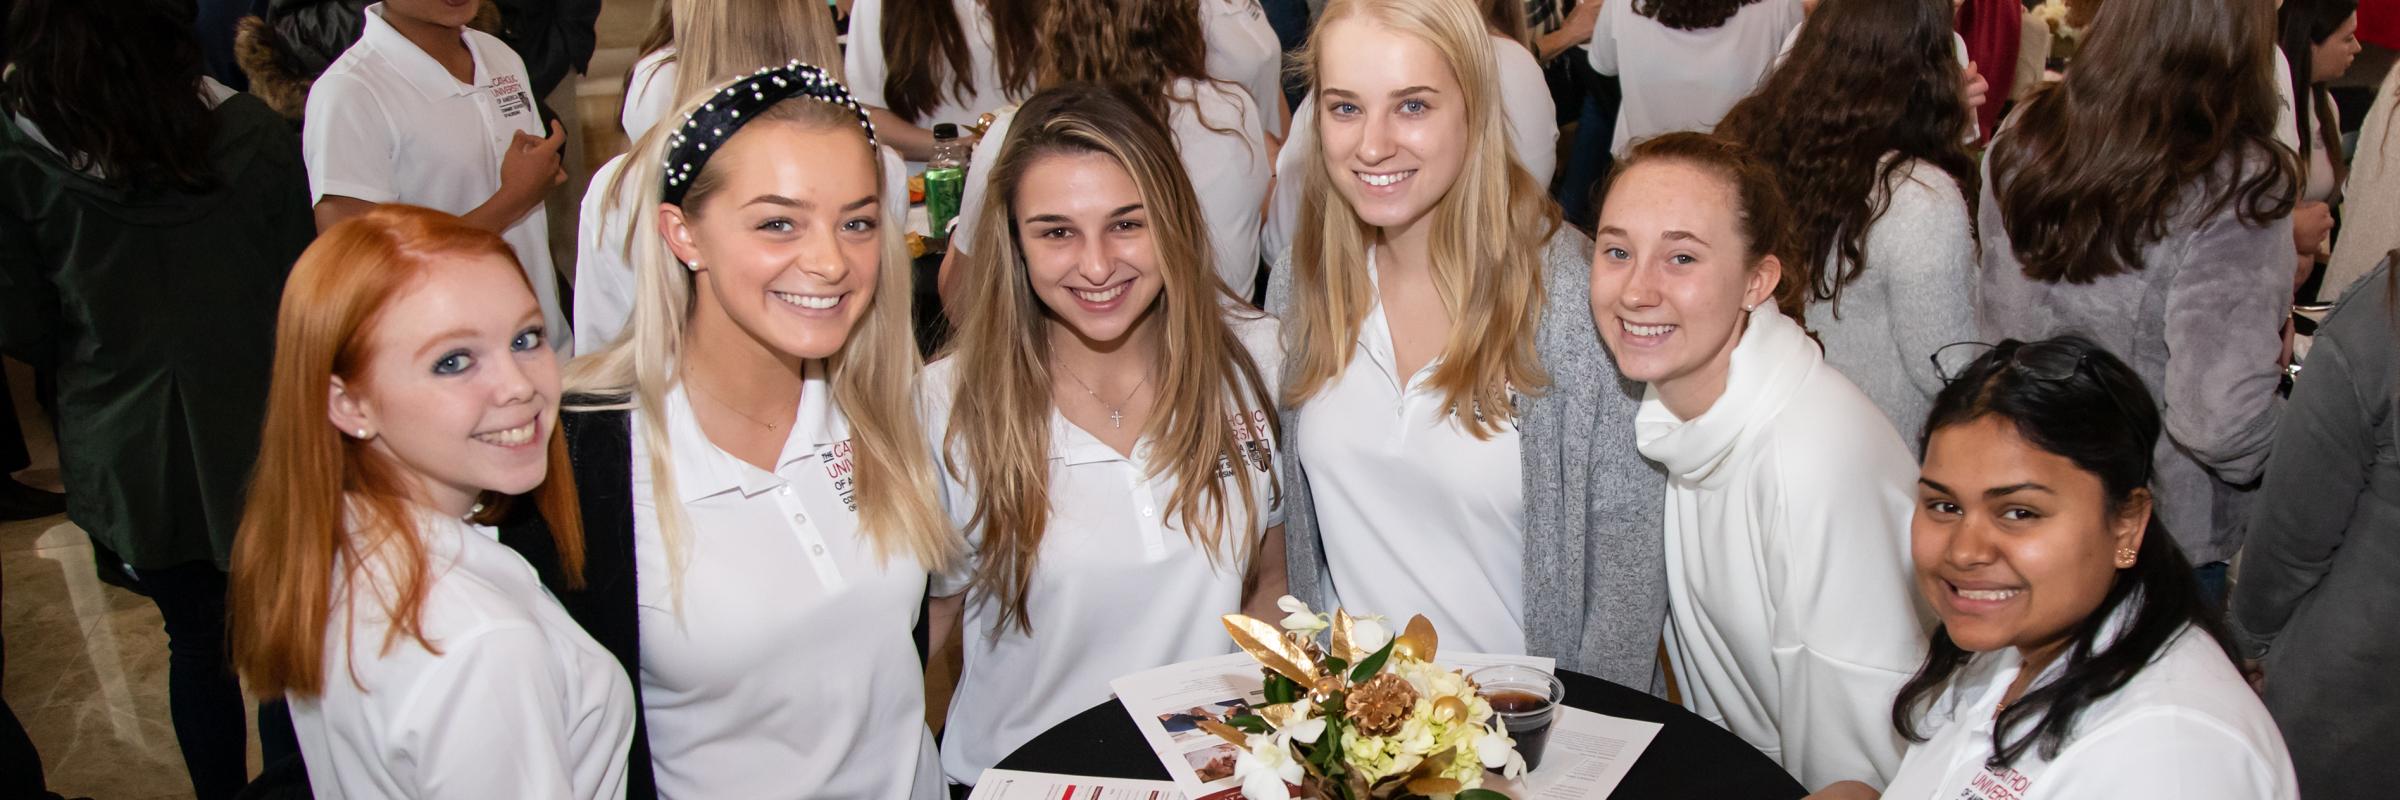 Nursing students at an event